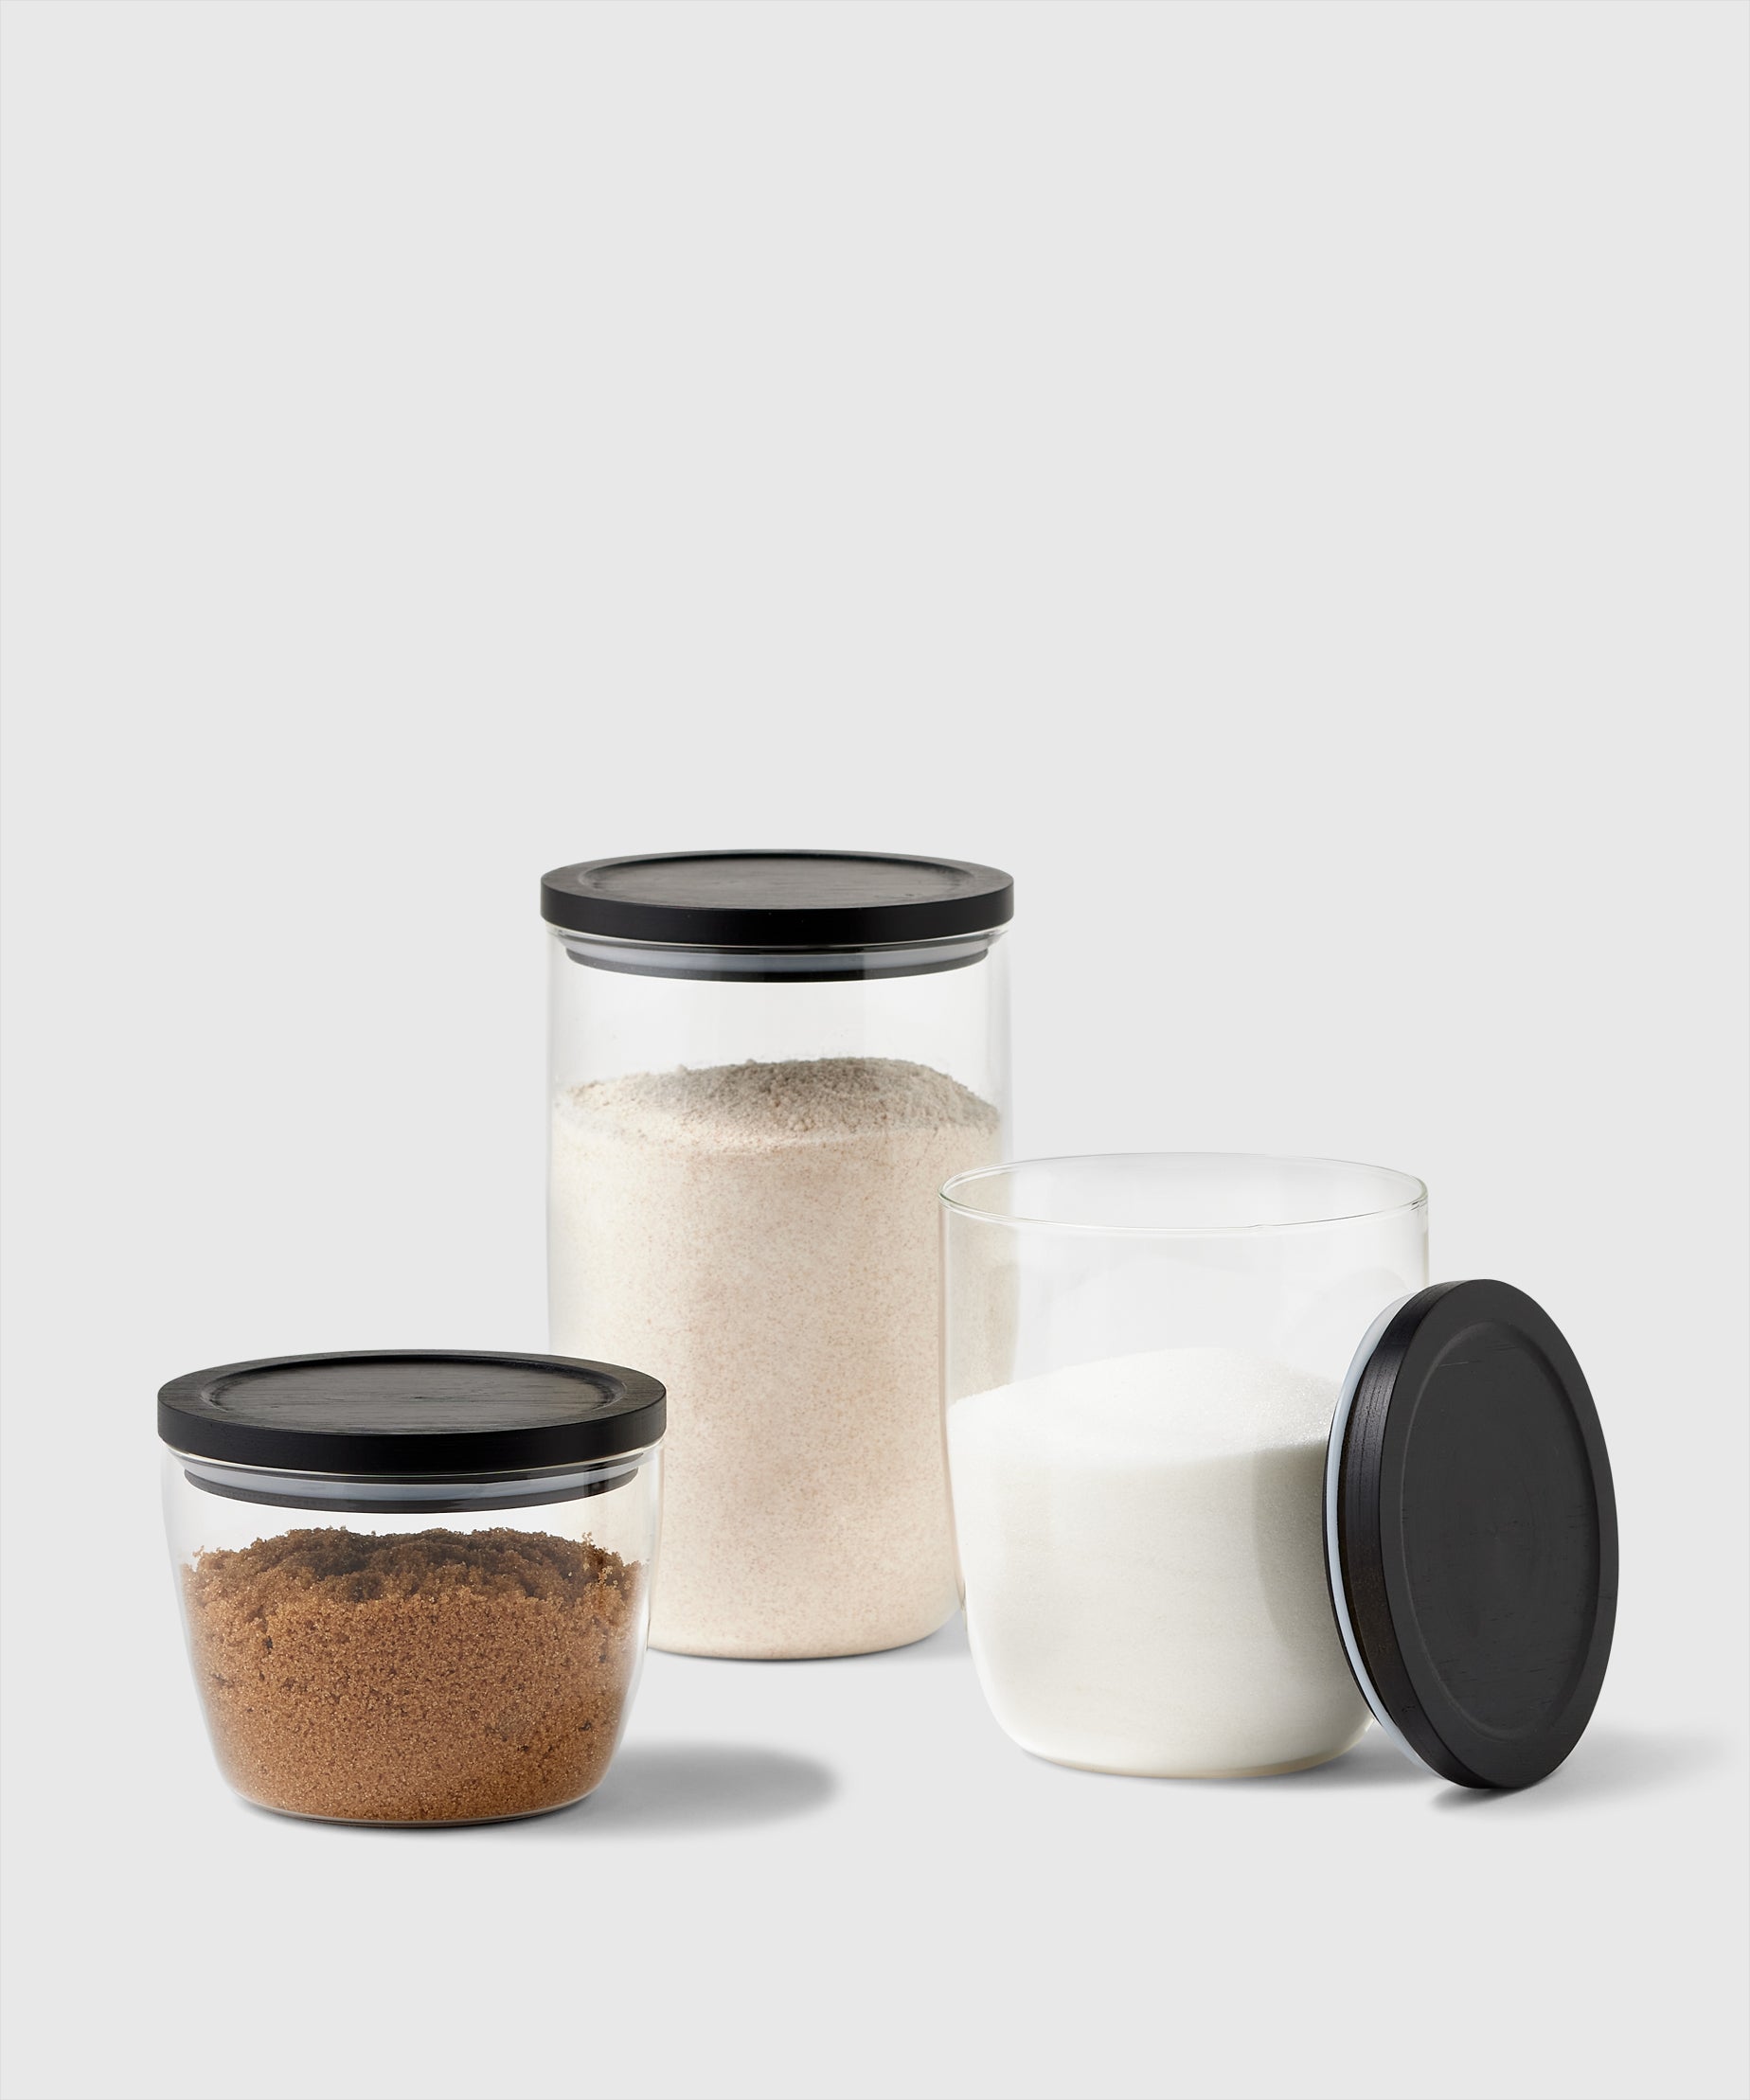 Modular Glass Canister With Black Lid | The Container Store x KonMari